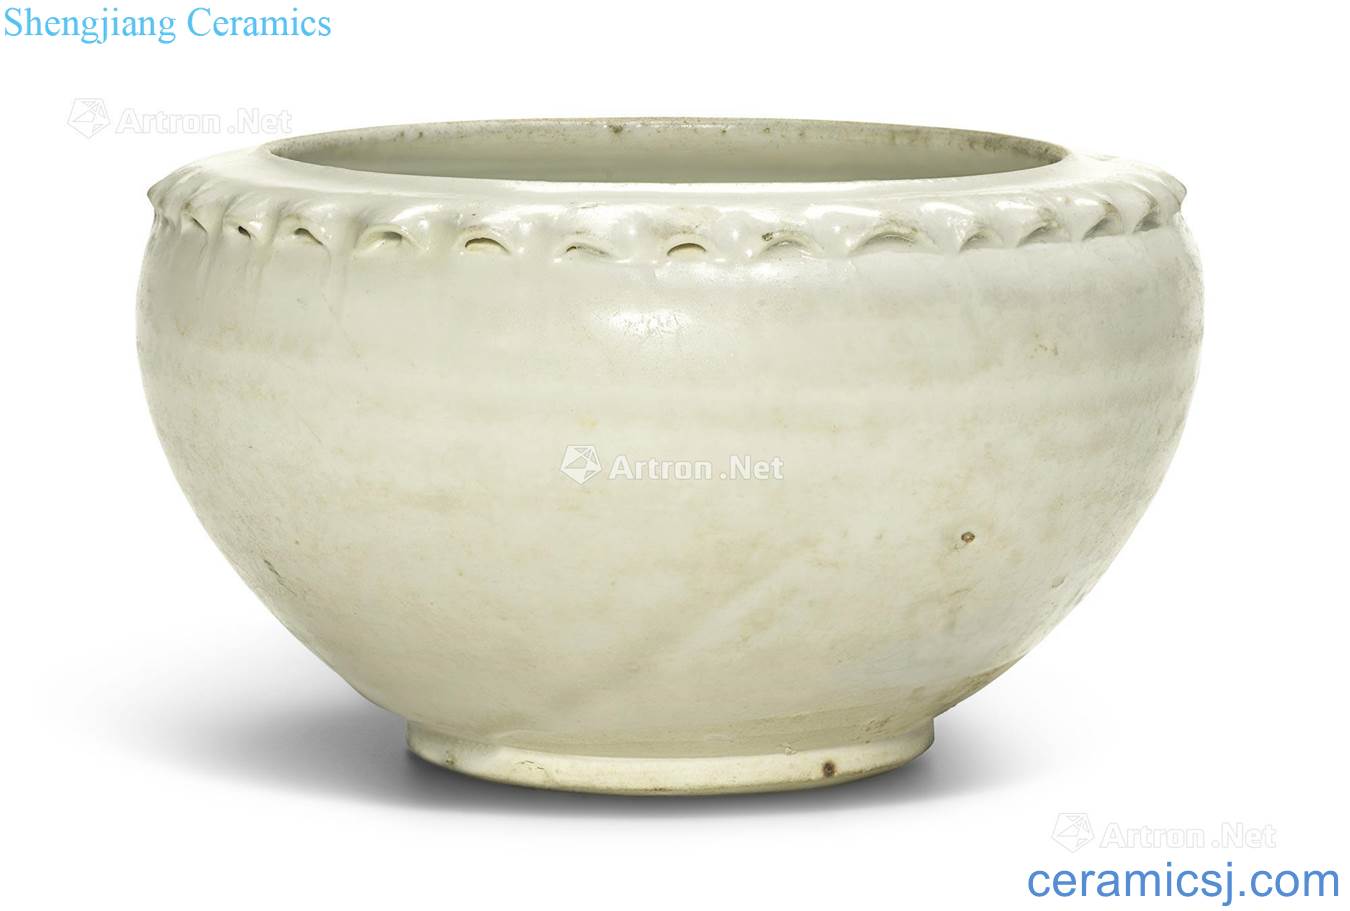 The song dynasty Craft flower mouth 盌 magnetic states